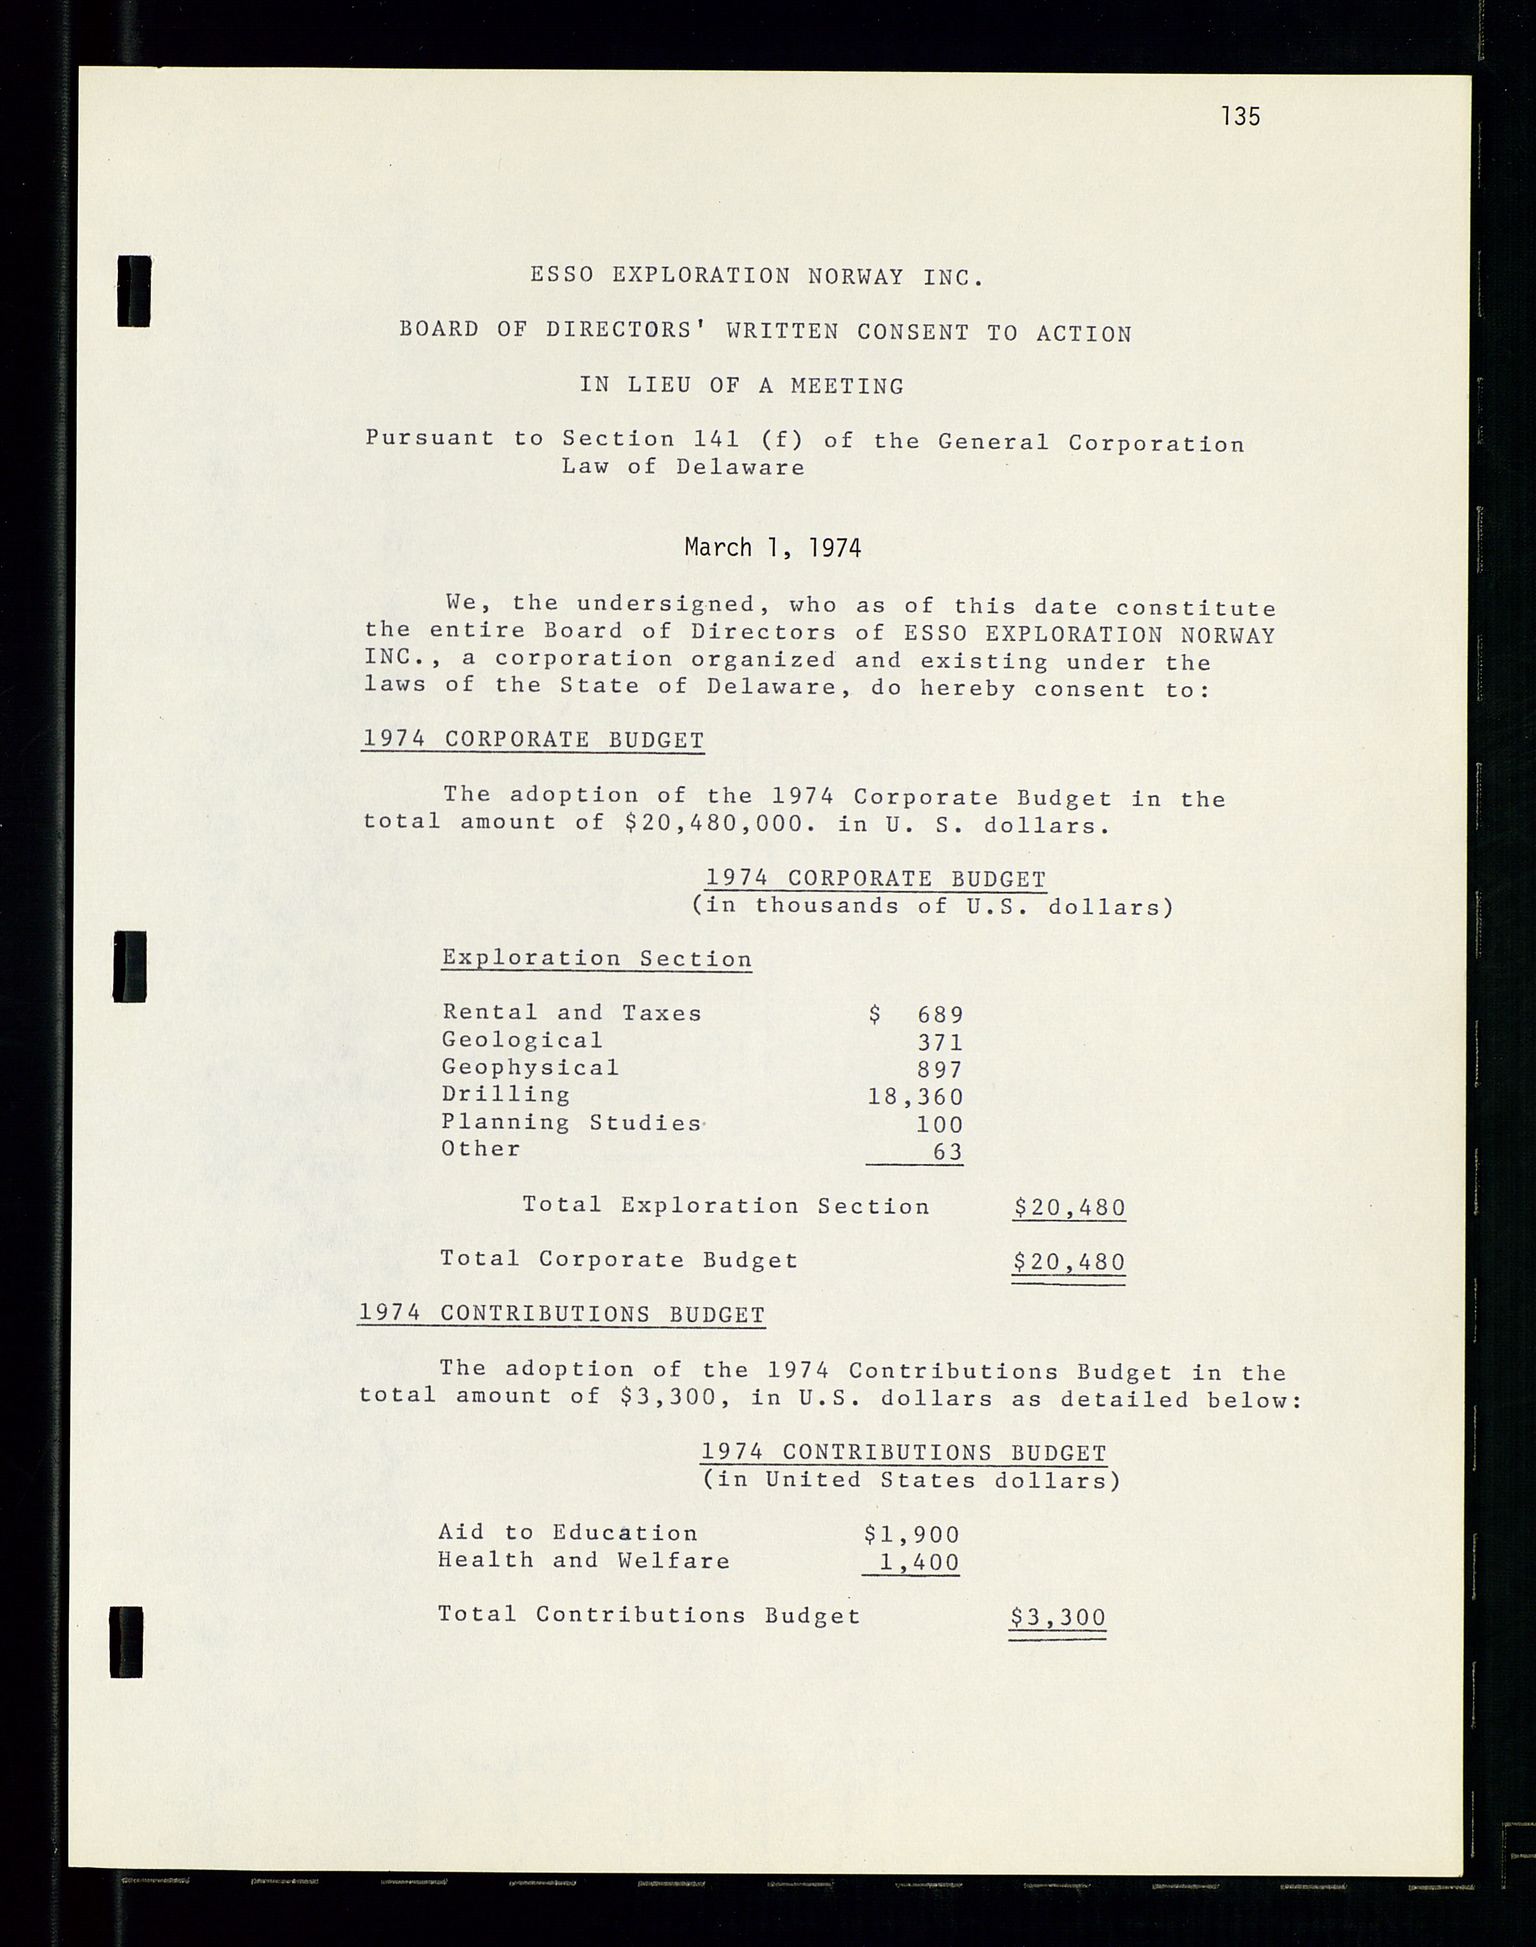 Pa 1512 - Esso Exploration and Production Norway Inc., SAST/A-101917/A/Aa/L0001/0001: Styredokumenter / Corporate records, By-Laws, Board meeting minutes, Incorporations, 1965-1975, s. 135